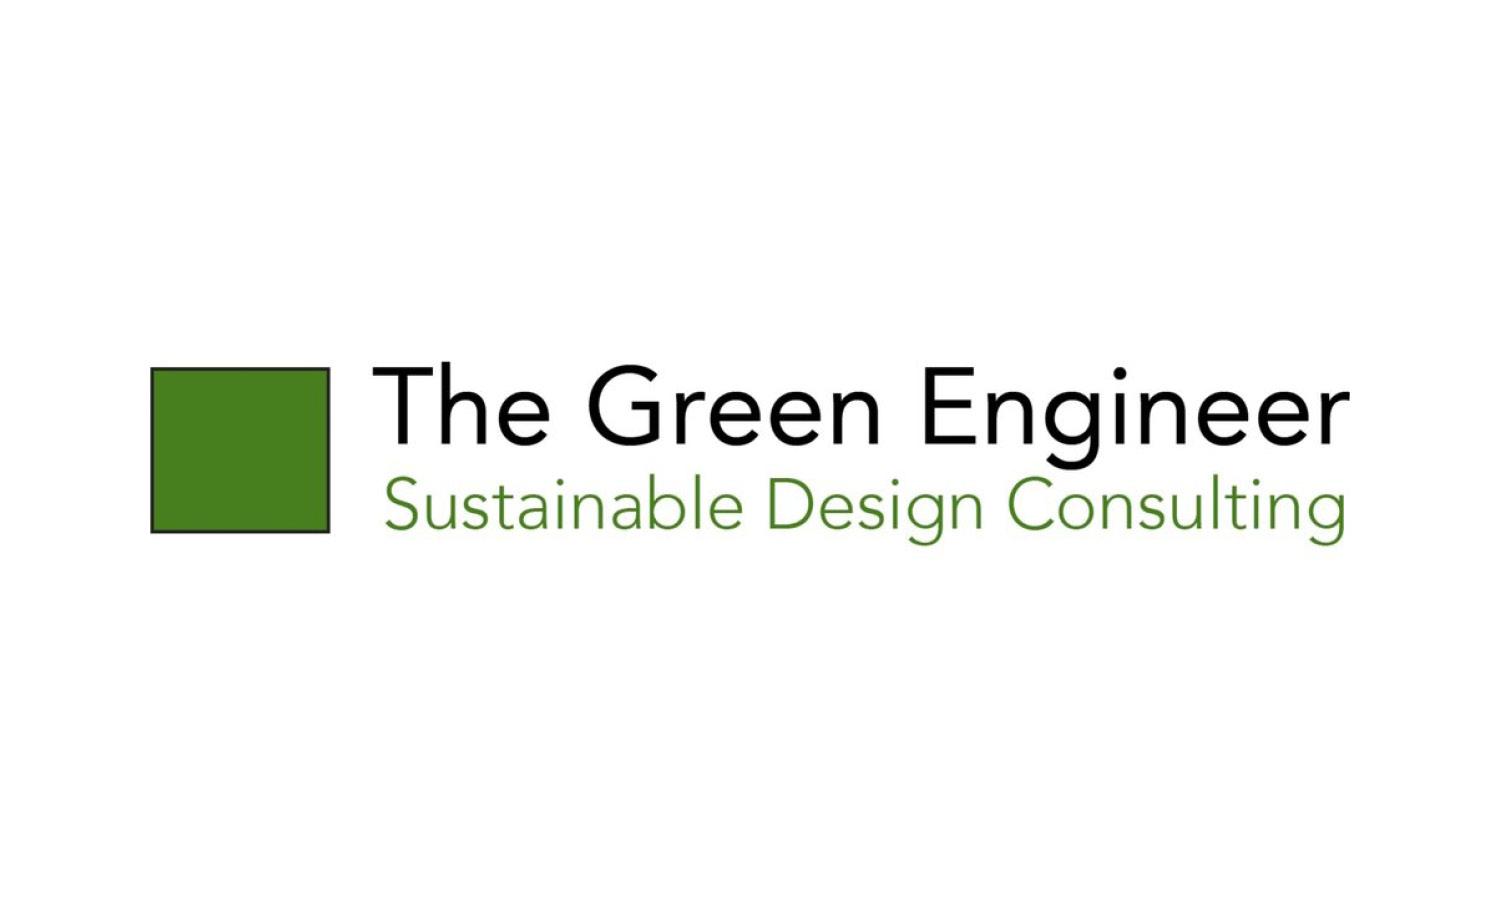 The Green Engineer - Sustainable Design Consulting